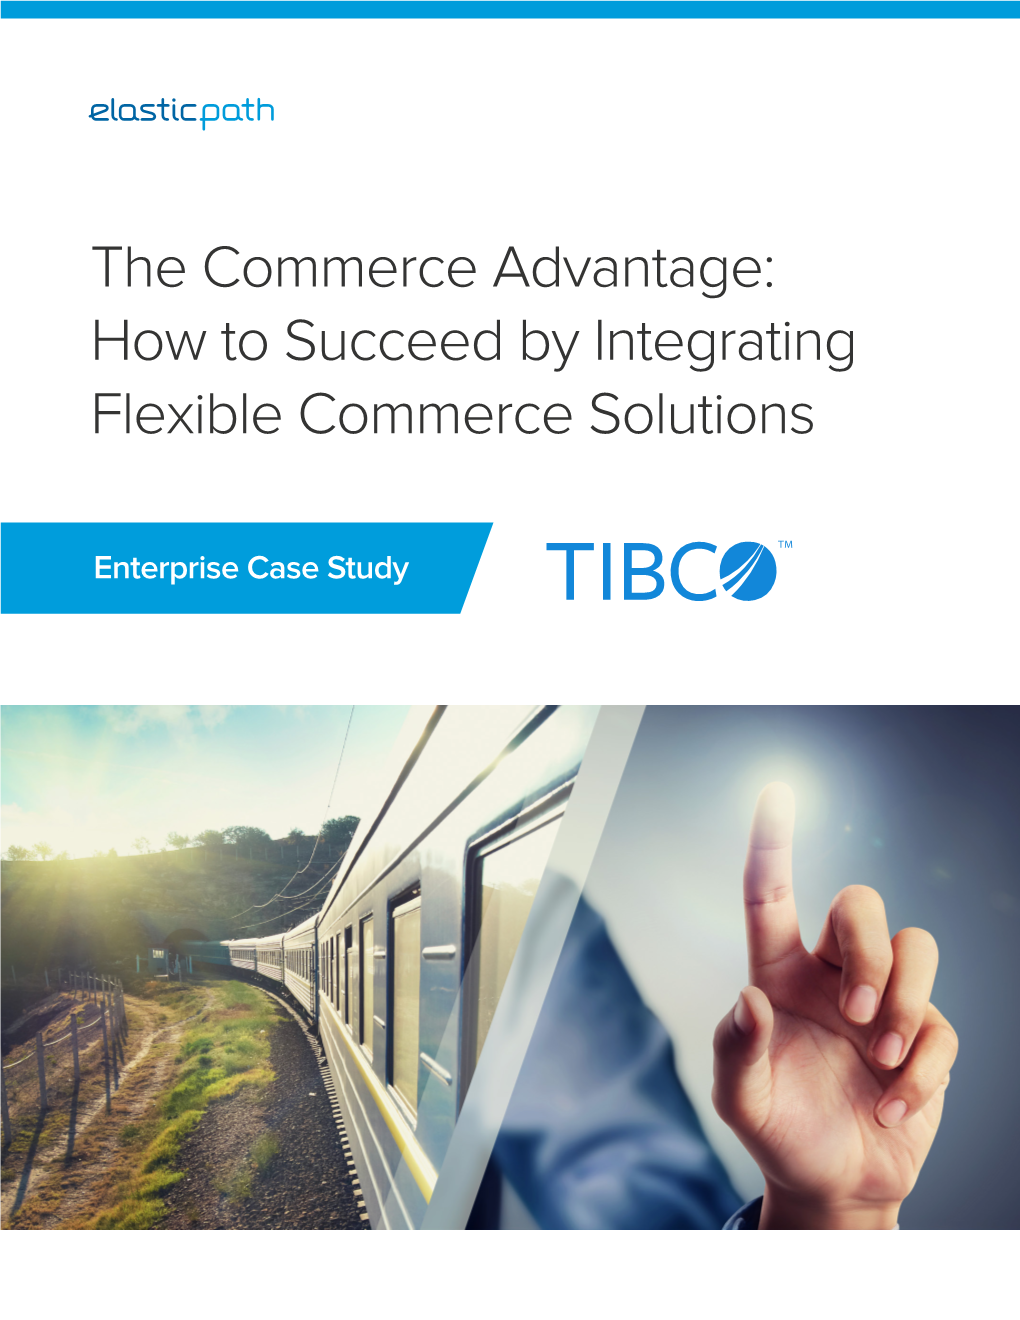 How to Succeed by Integrating Flexible Commerce Solutions